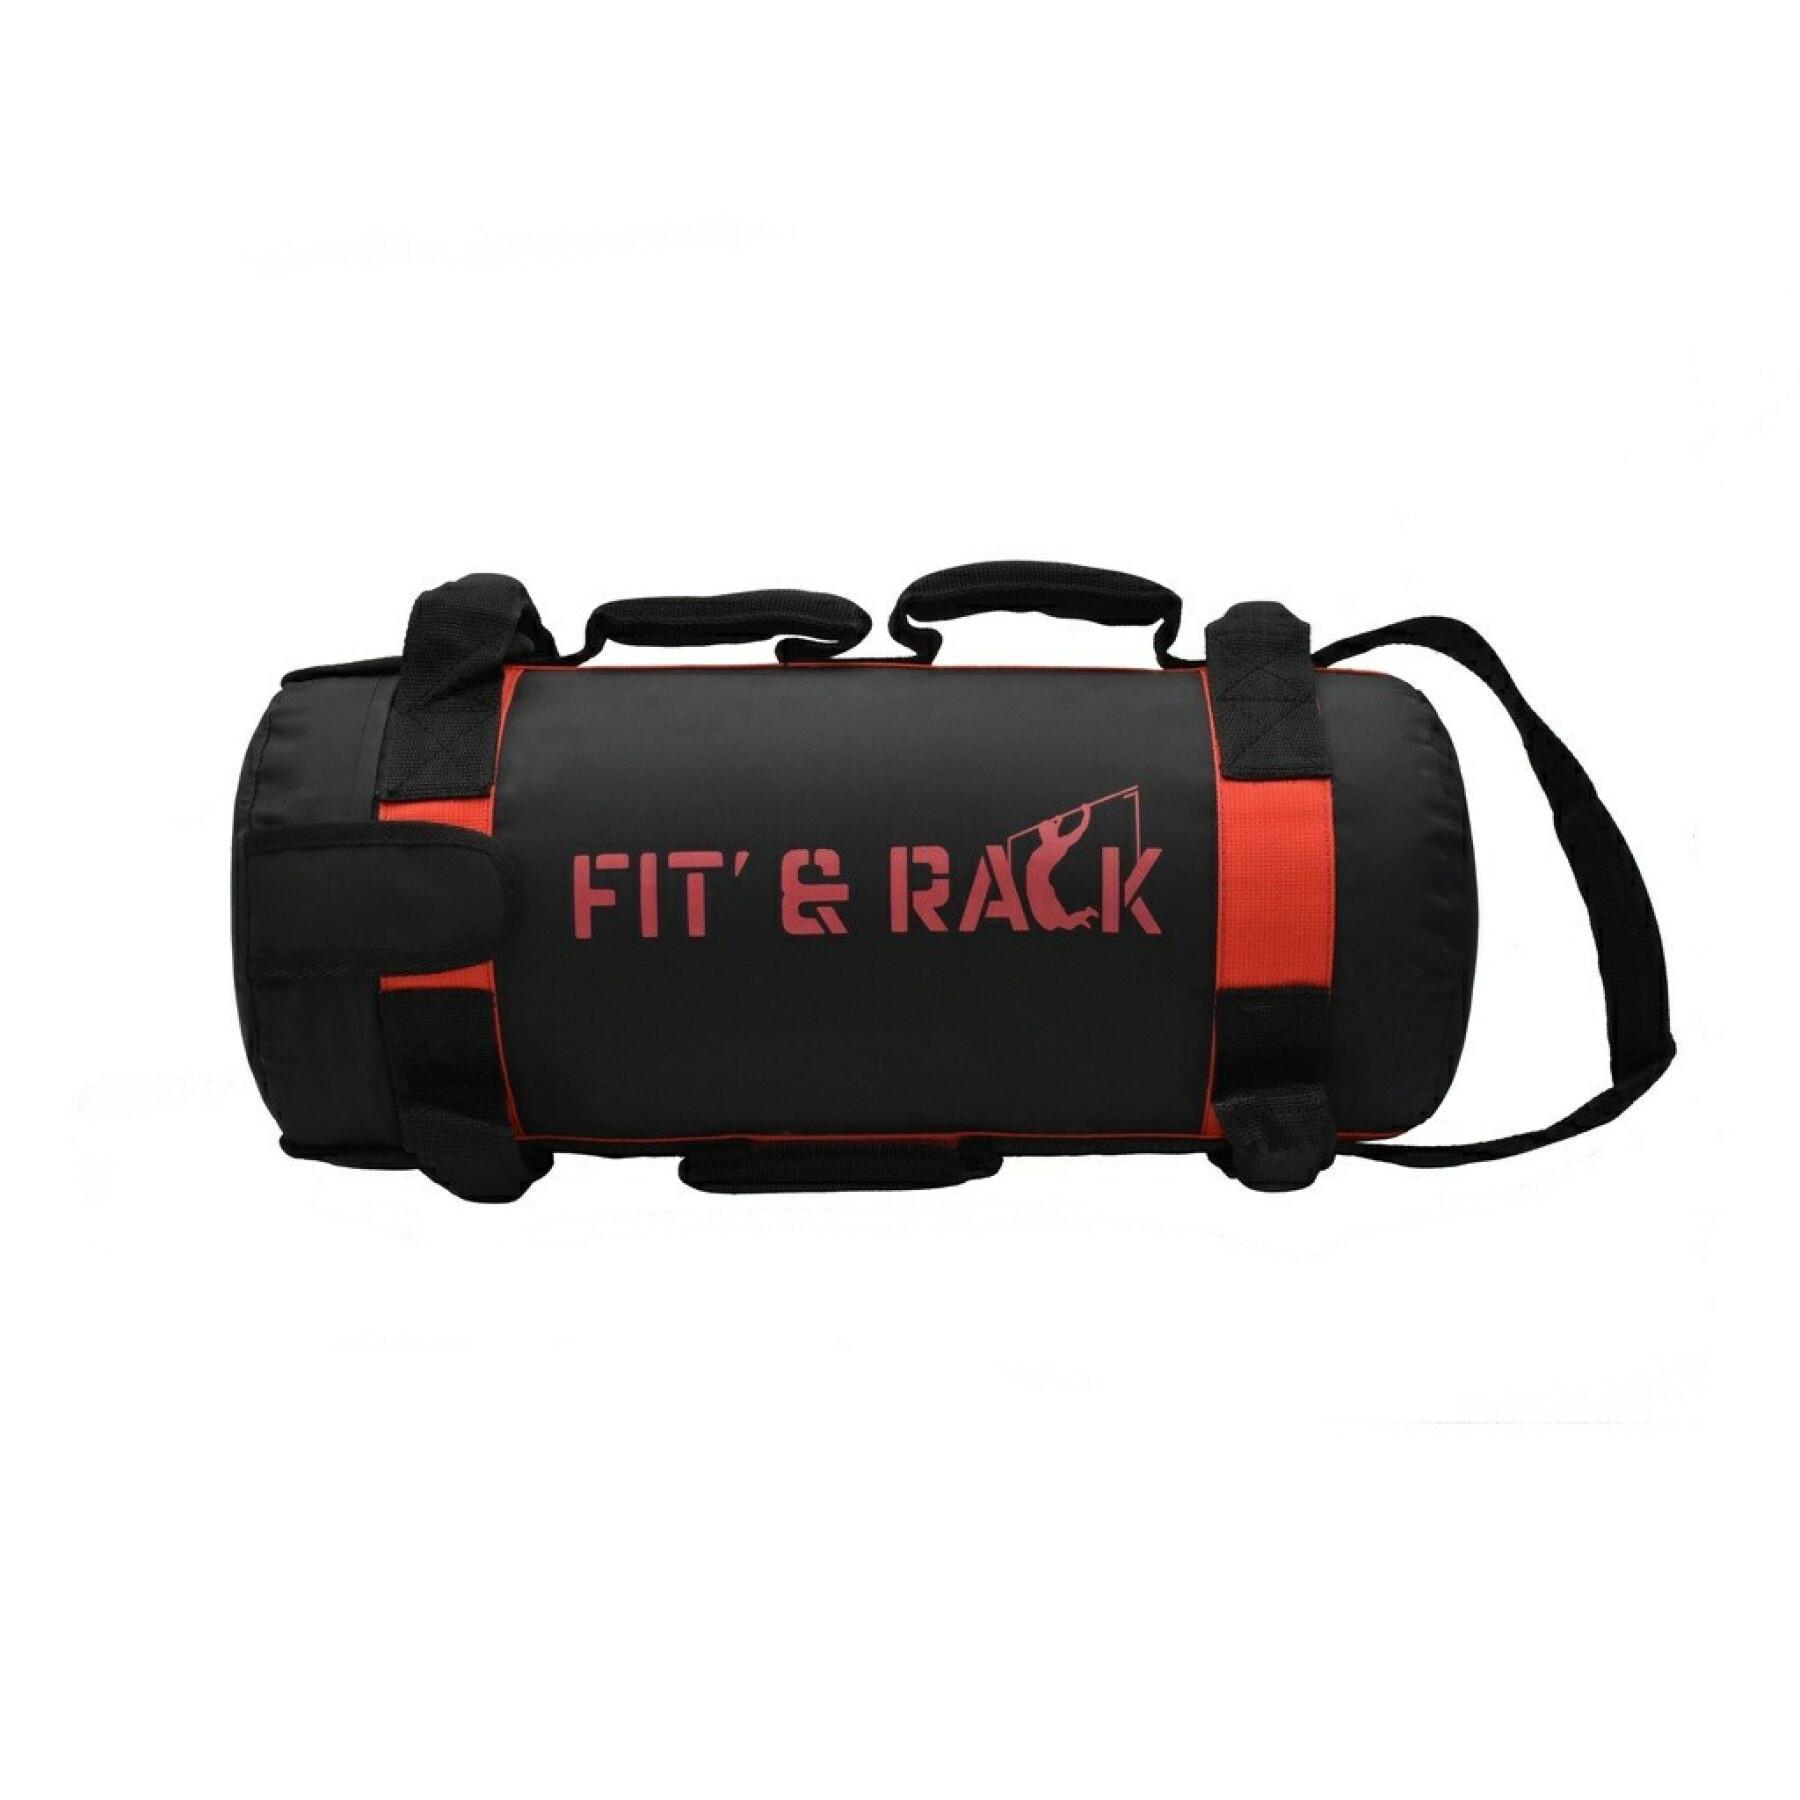 Power Bag 10 kg Black/Red PVC and PE Pure2Improve